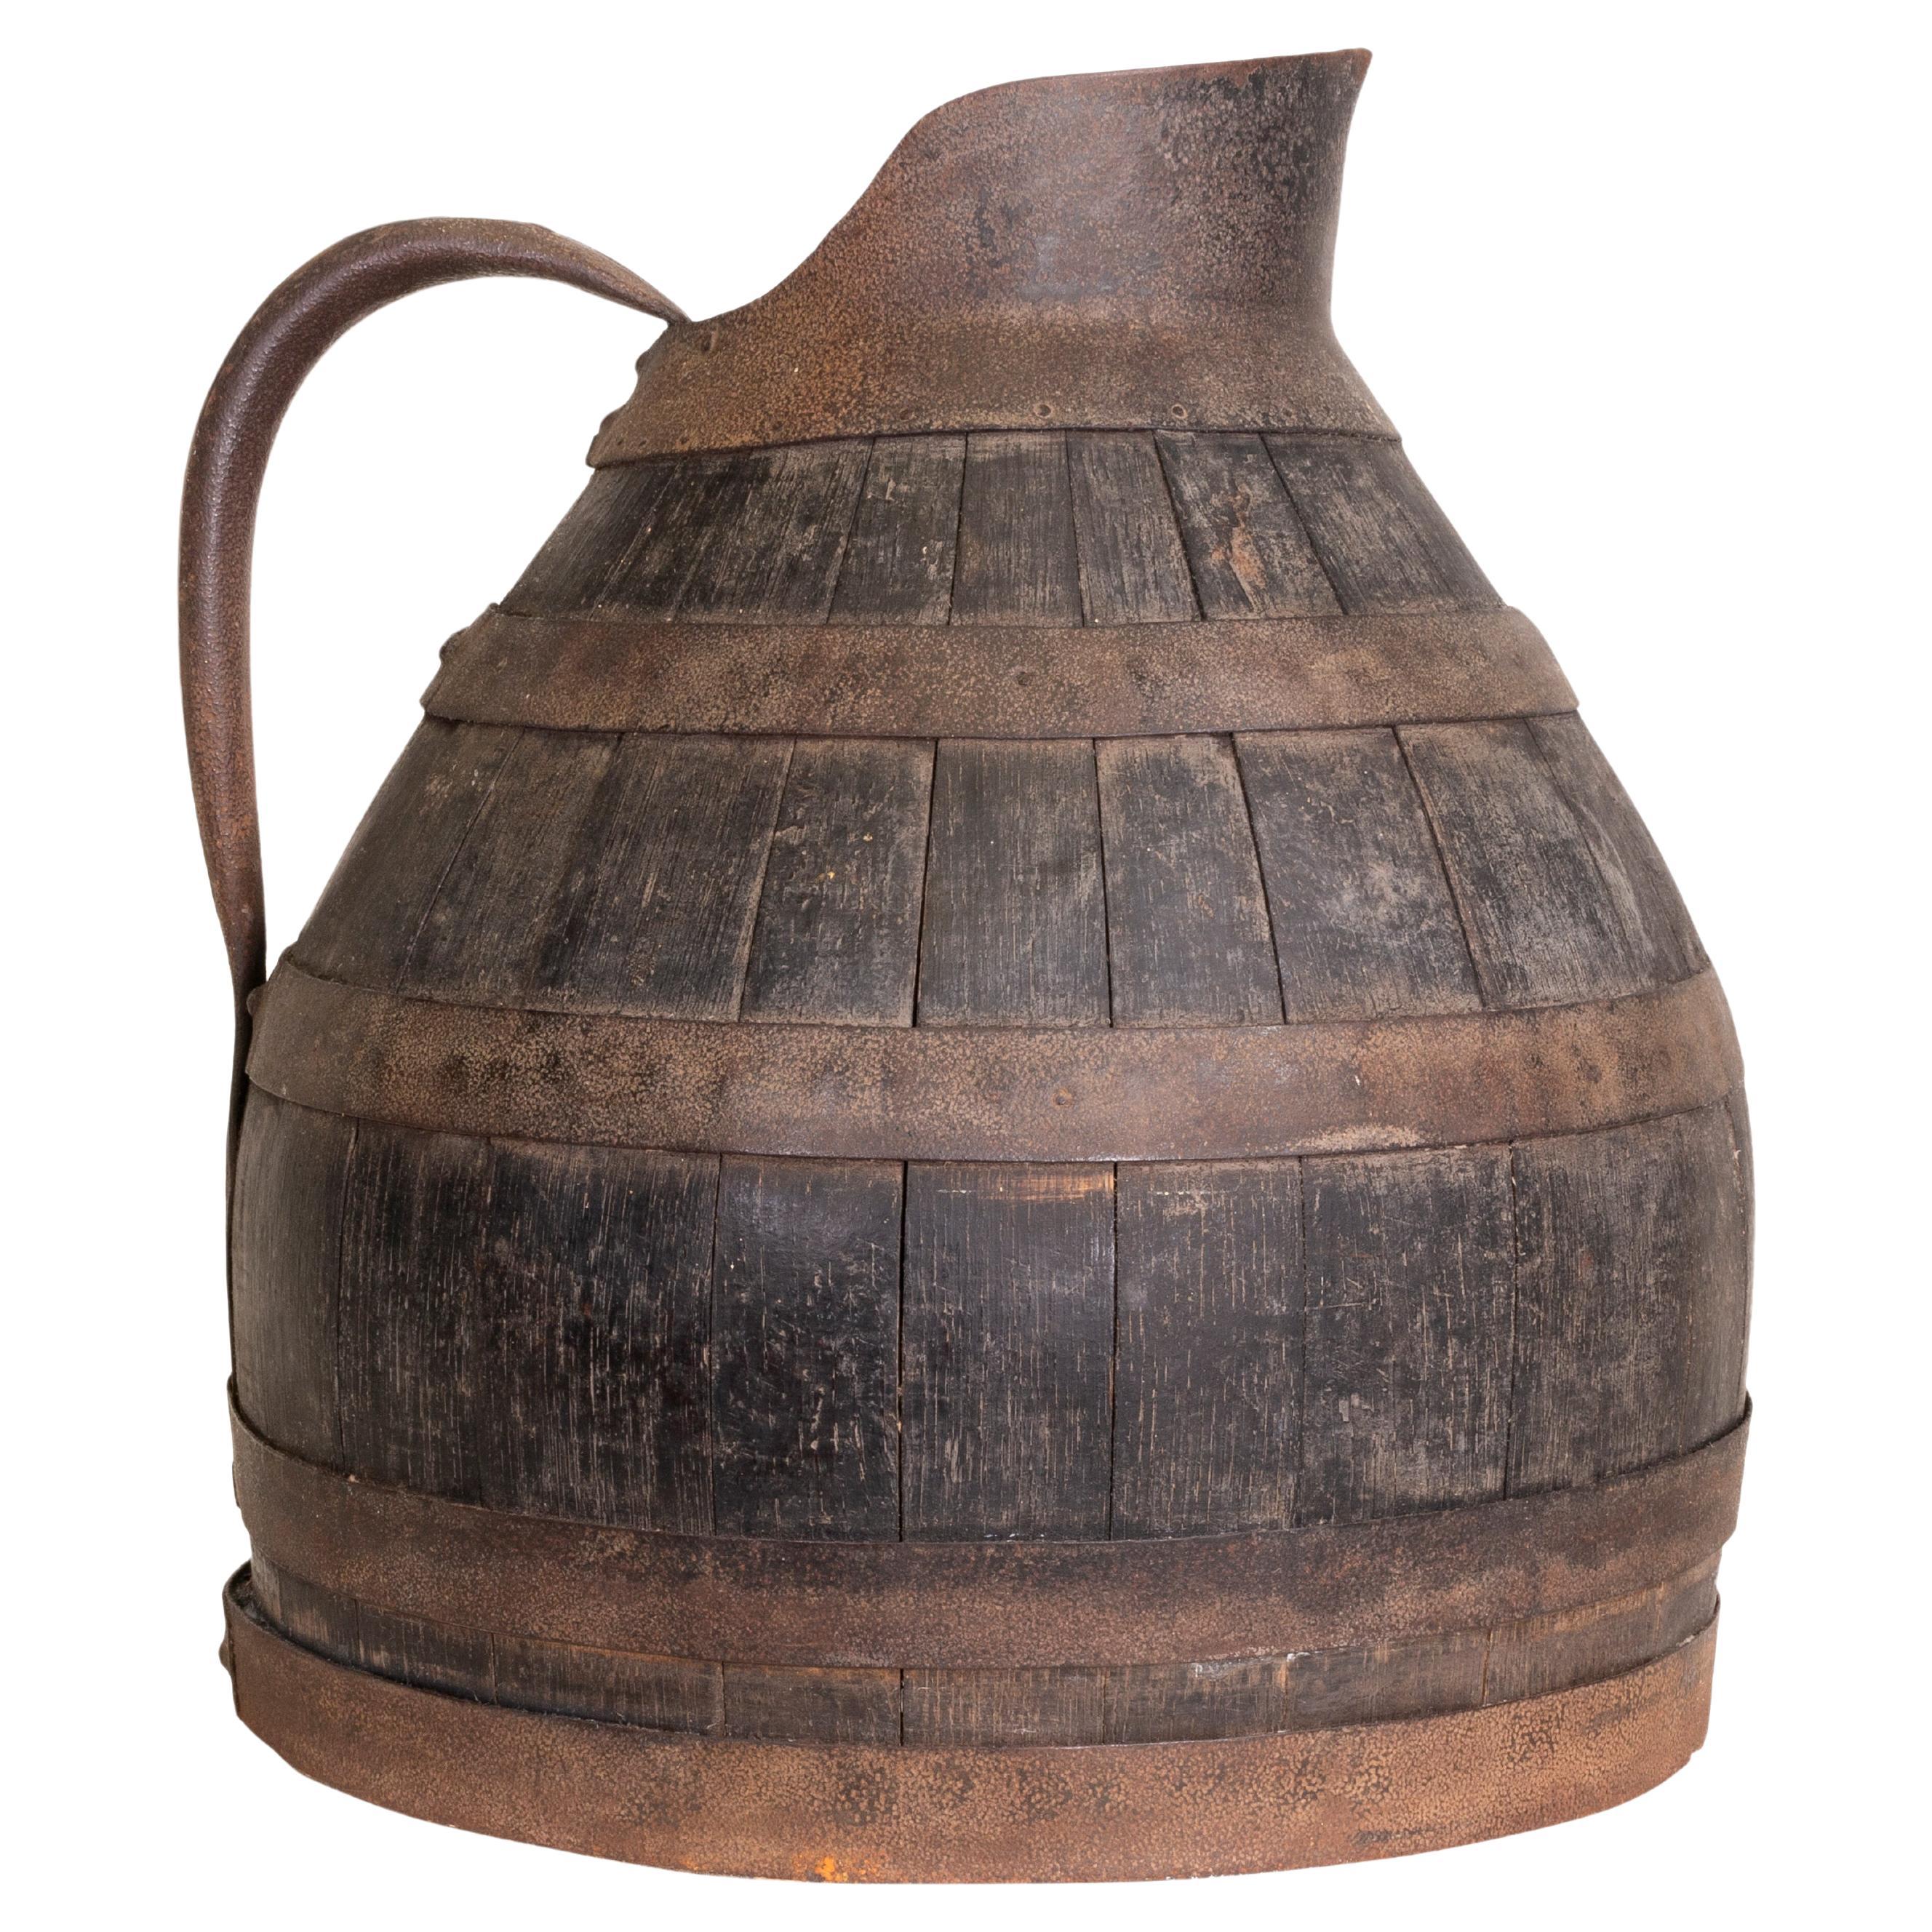 19th Century French Alascian Wine Pitcher For Sale